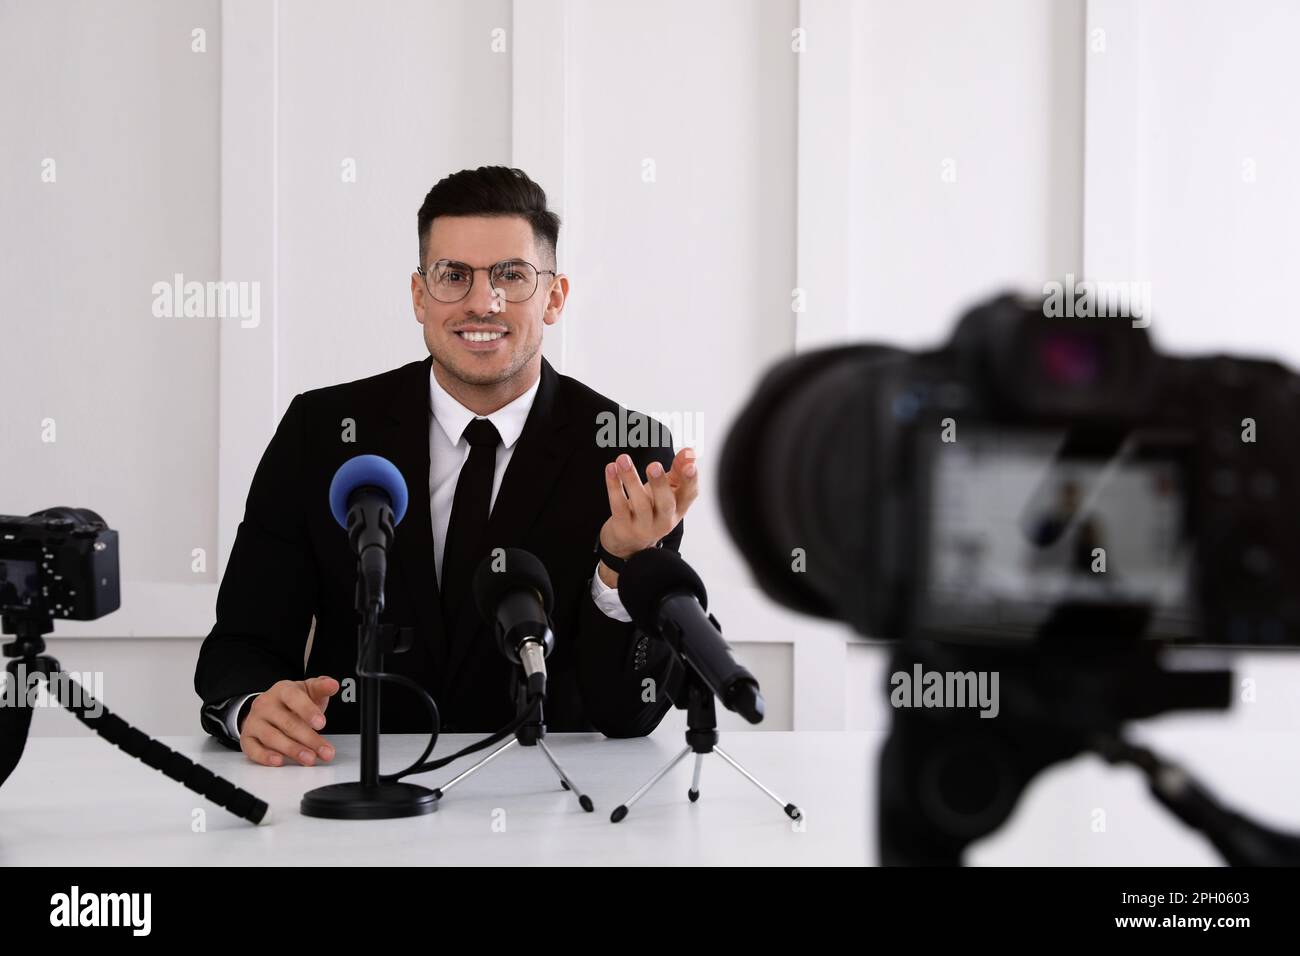 Business man giving interview at official event Stock Photo